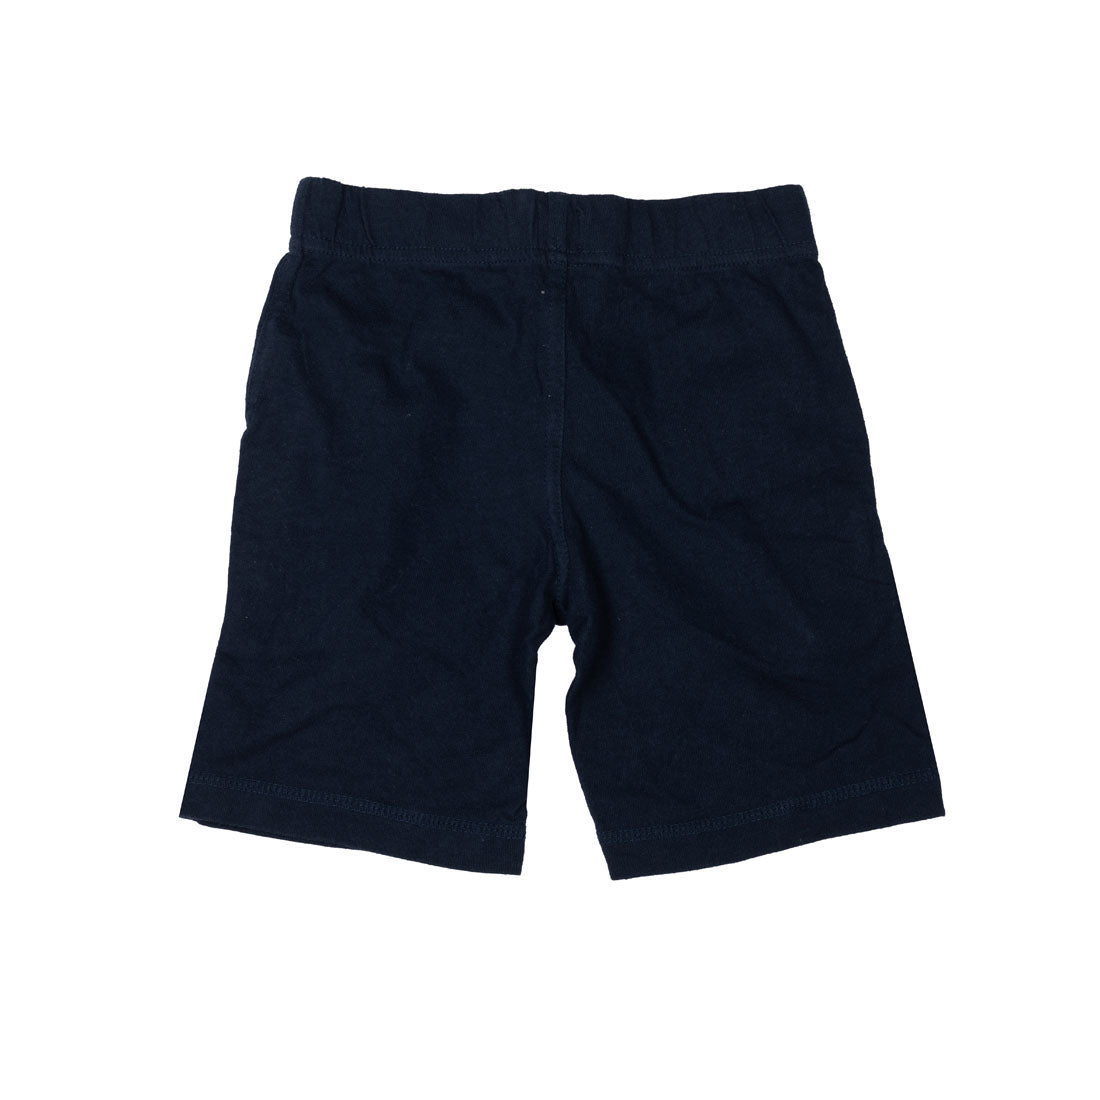 Gap Shorts For Boys - mymadstore.com